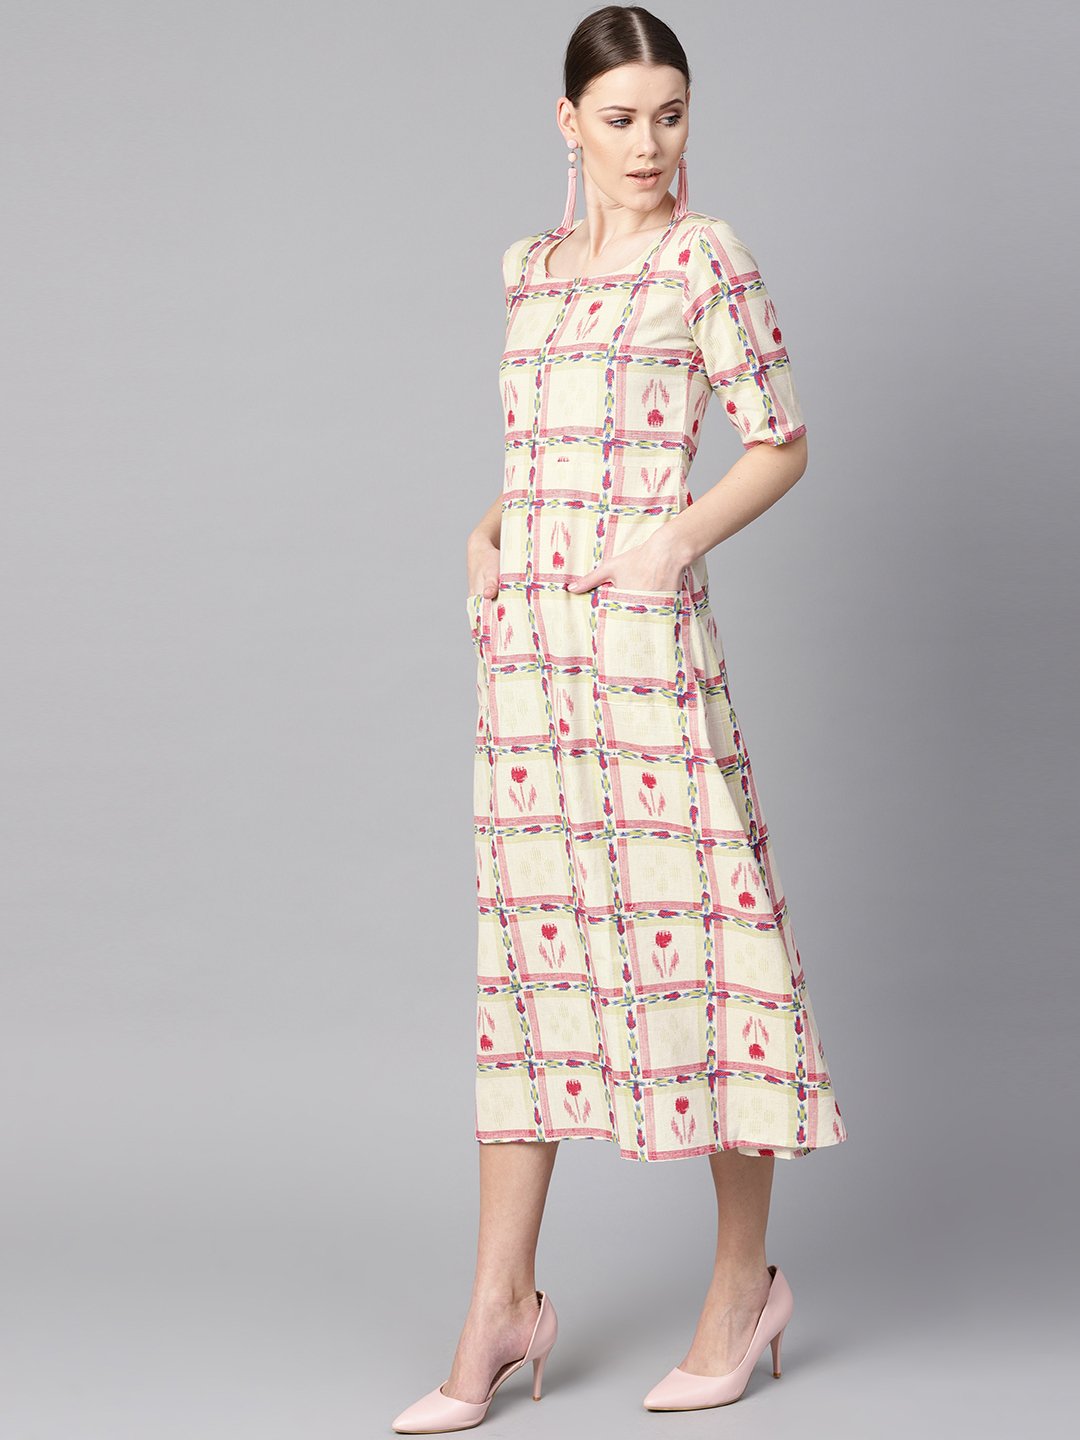 Women's White Floral Ikat Print Square Neck Aline Dress With Front Pockets. - Nayo Clothing